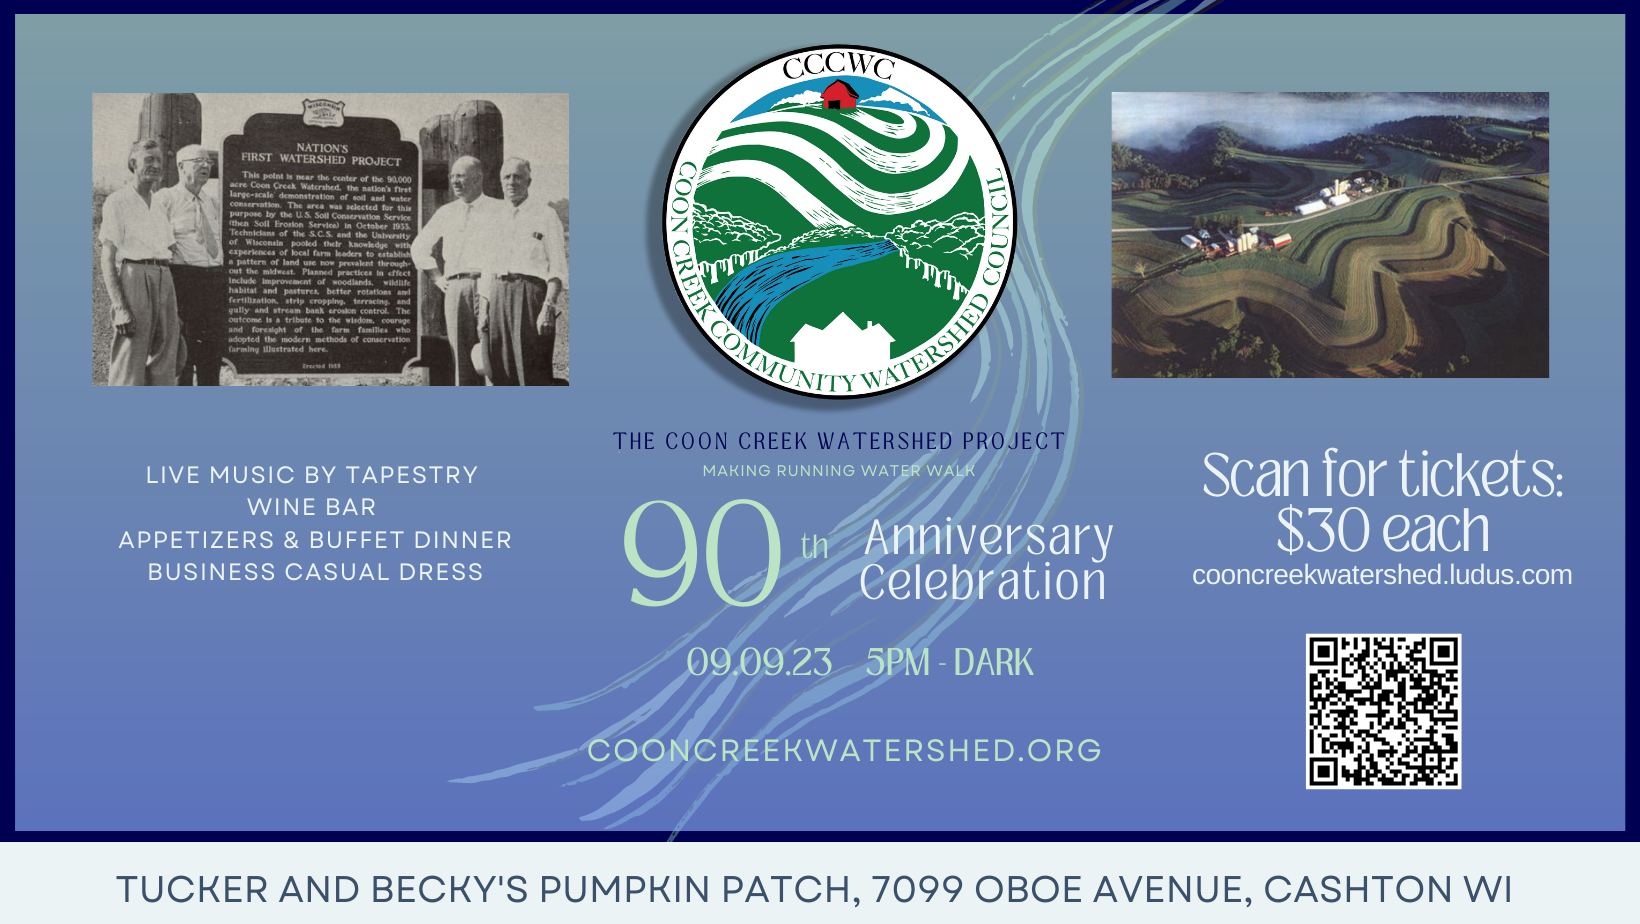 The Coon Creek Community Watershed Council (CCCWC) is announcing its 90th Anniversary Celebration on September 9th, 2023.